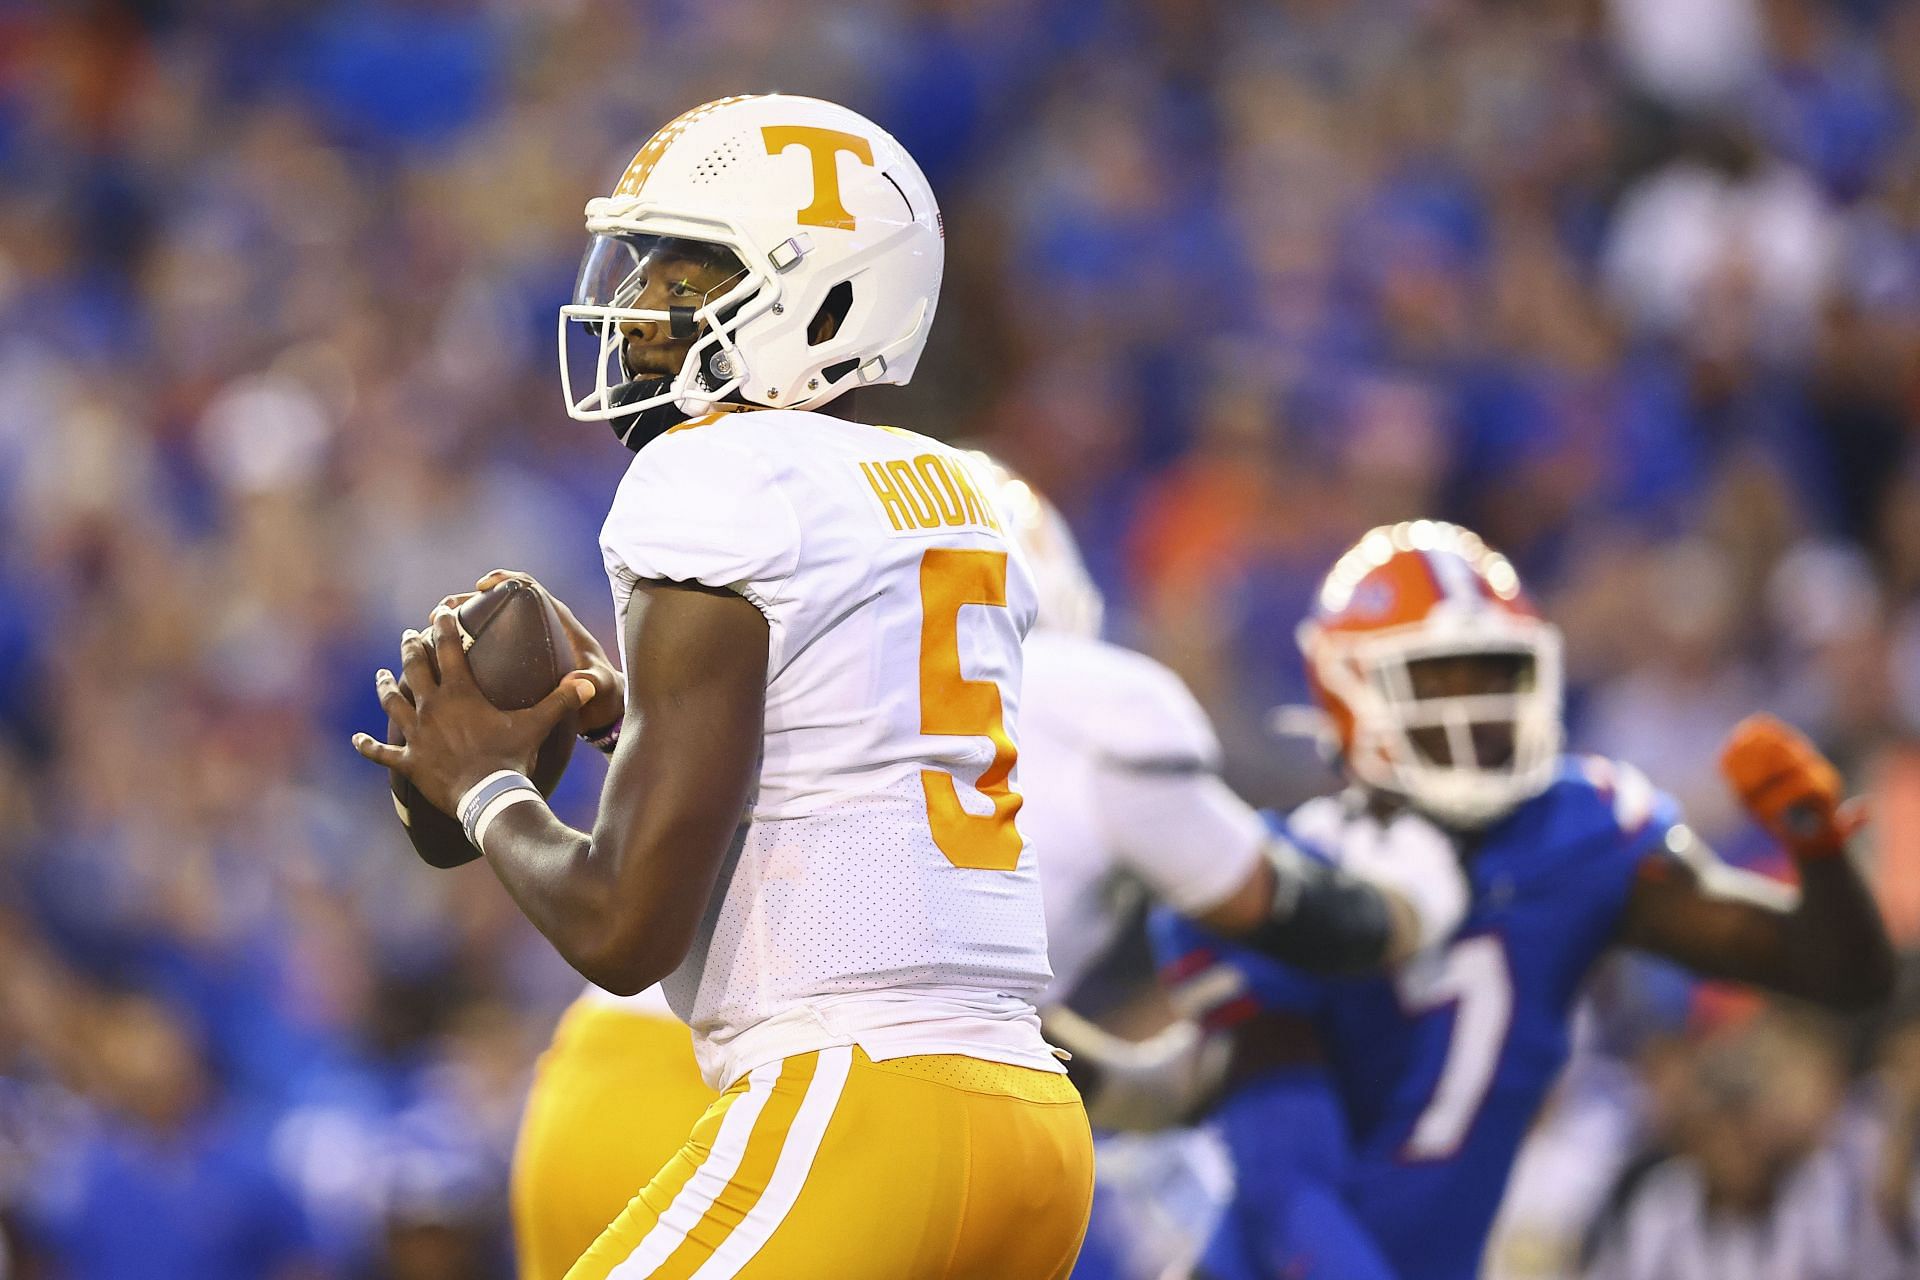 Hendon Hooker #5 of the Tennessee Volunteers looks to pass during the first quarter of a game against the Florida Gators 